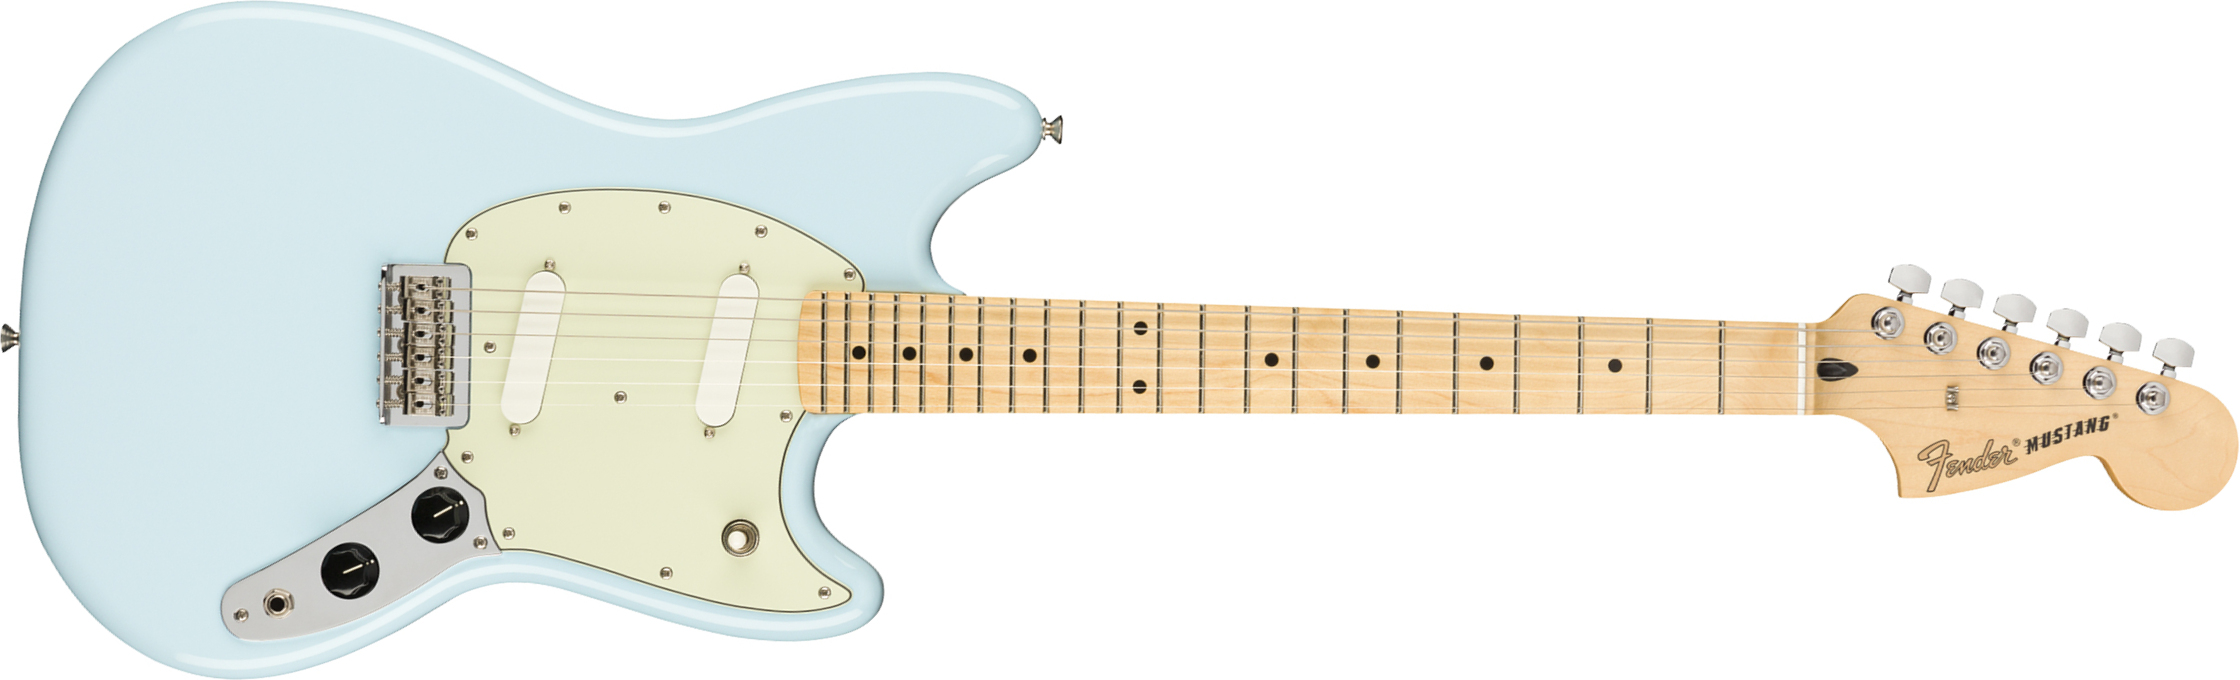 Fender Mustang Player Mex Ht Ss Mn - Surf Blue - Retro-Rock-E-Gitarre - Main picture